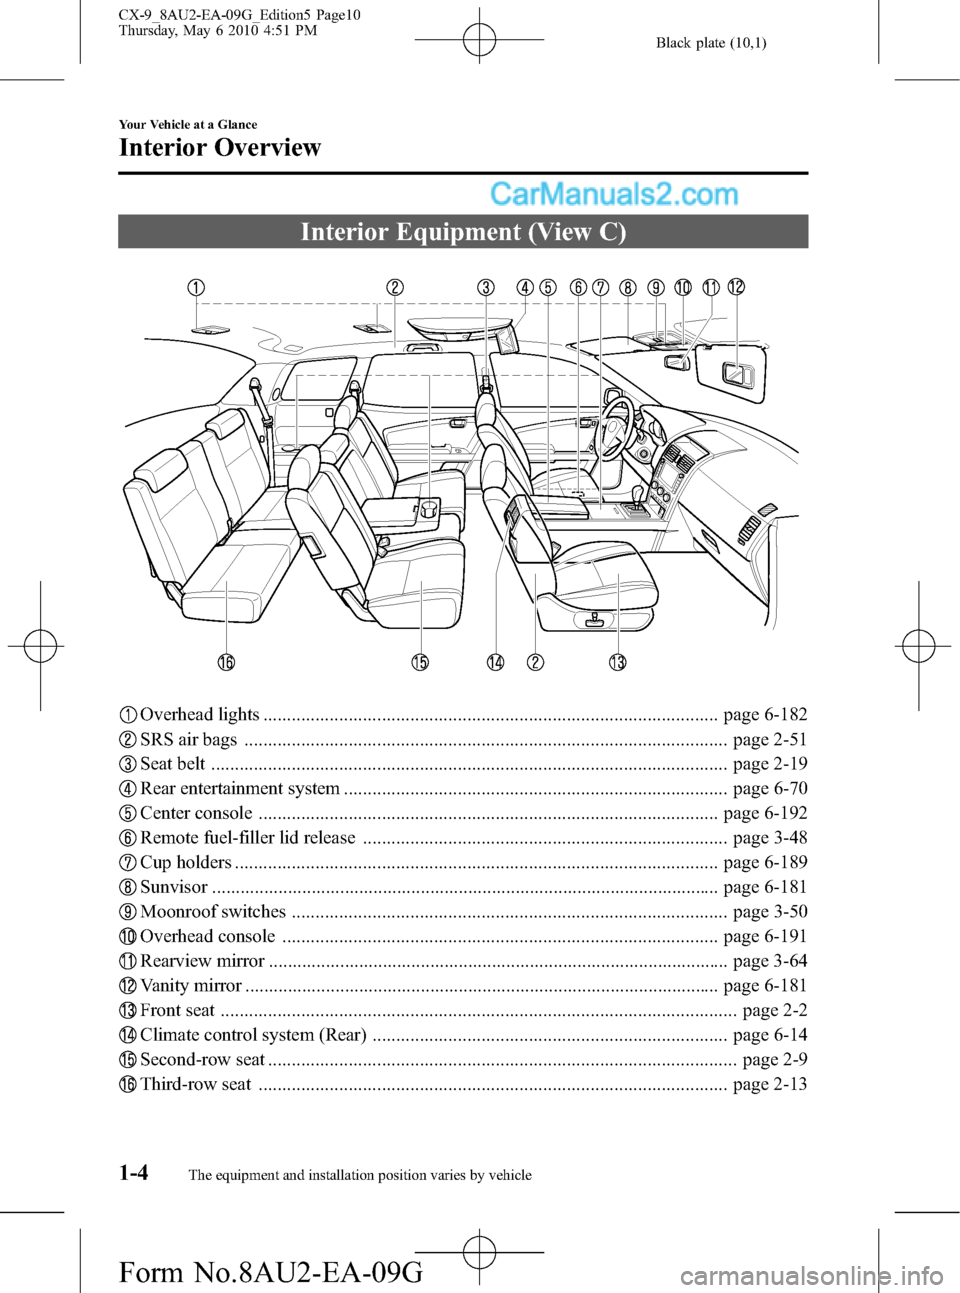 MAZDA MODEL CX-9 2010  Owners Manual (in English) Black plate (10,1)
Interior Equipment (View C)
Overhead lights ................................................................................................ page 6-182
SRS air bags ................